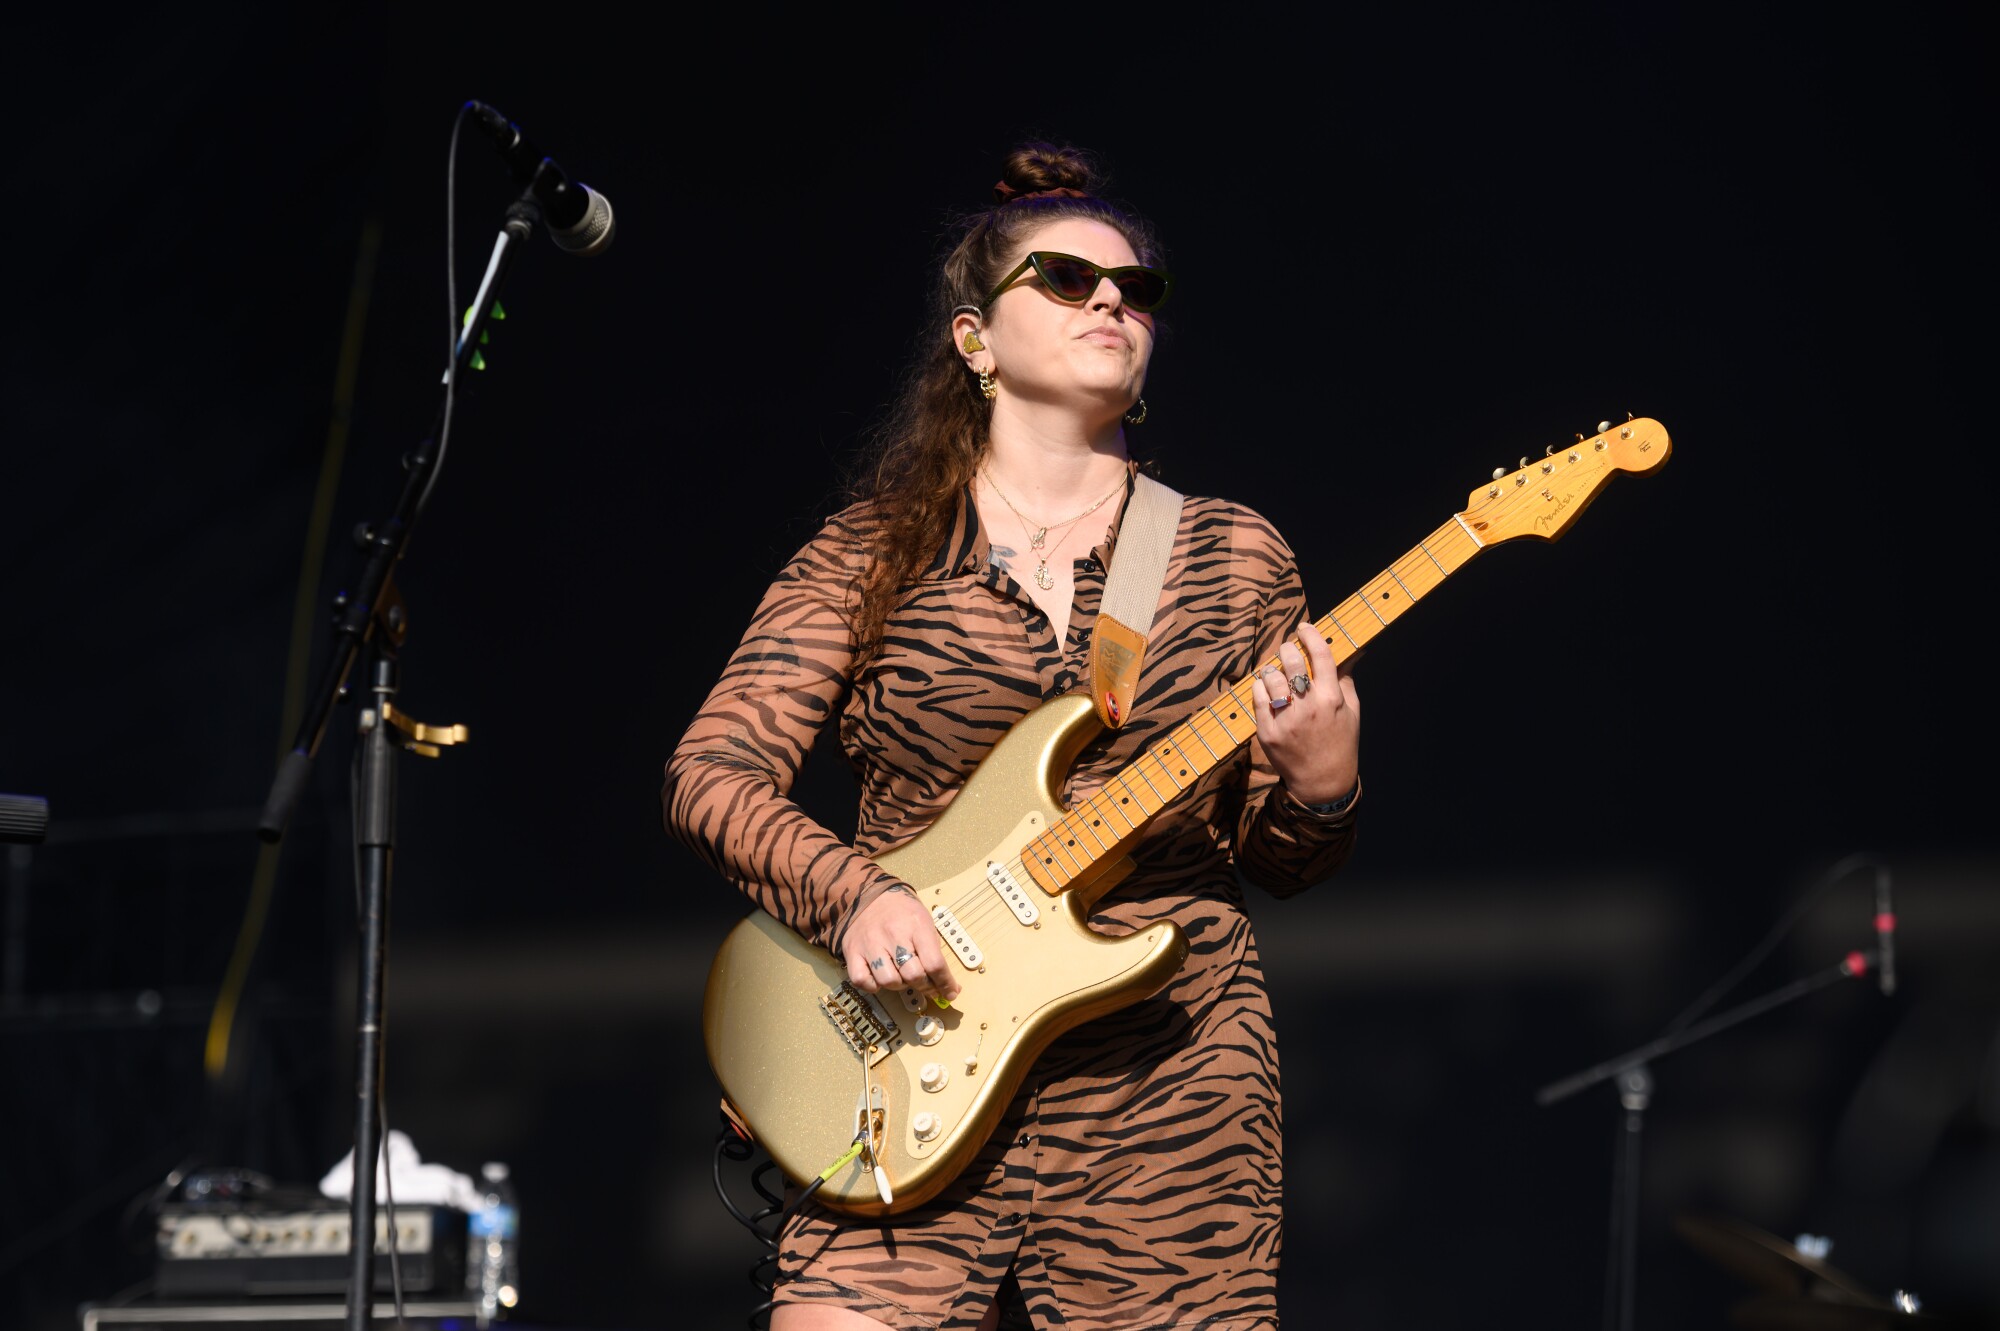 A woman onstage playing electric guitar, dressed in a leopard-print jumpsuit and wearing sunglasses.